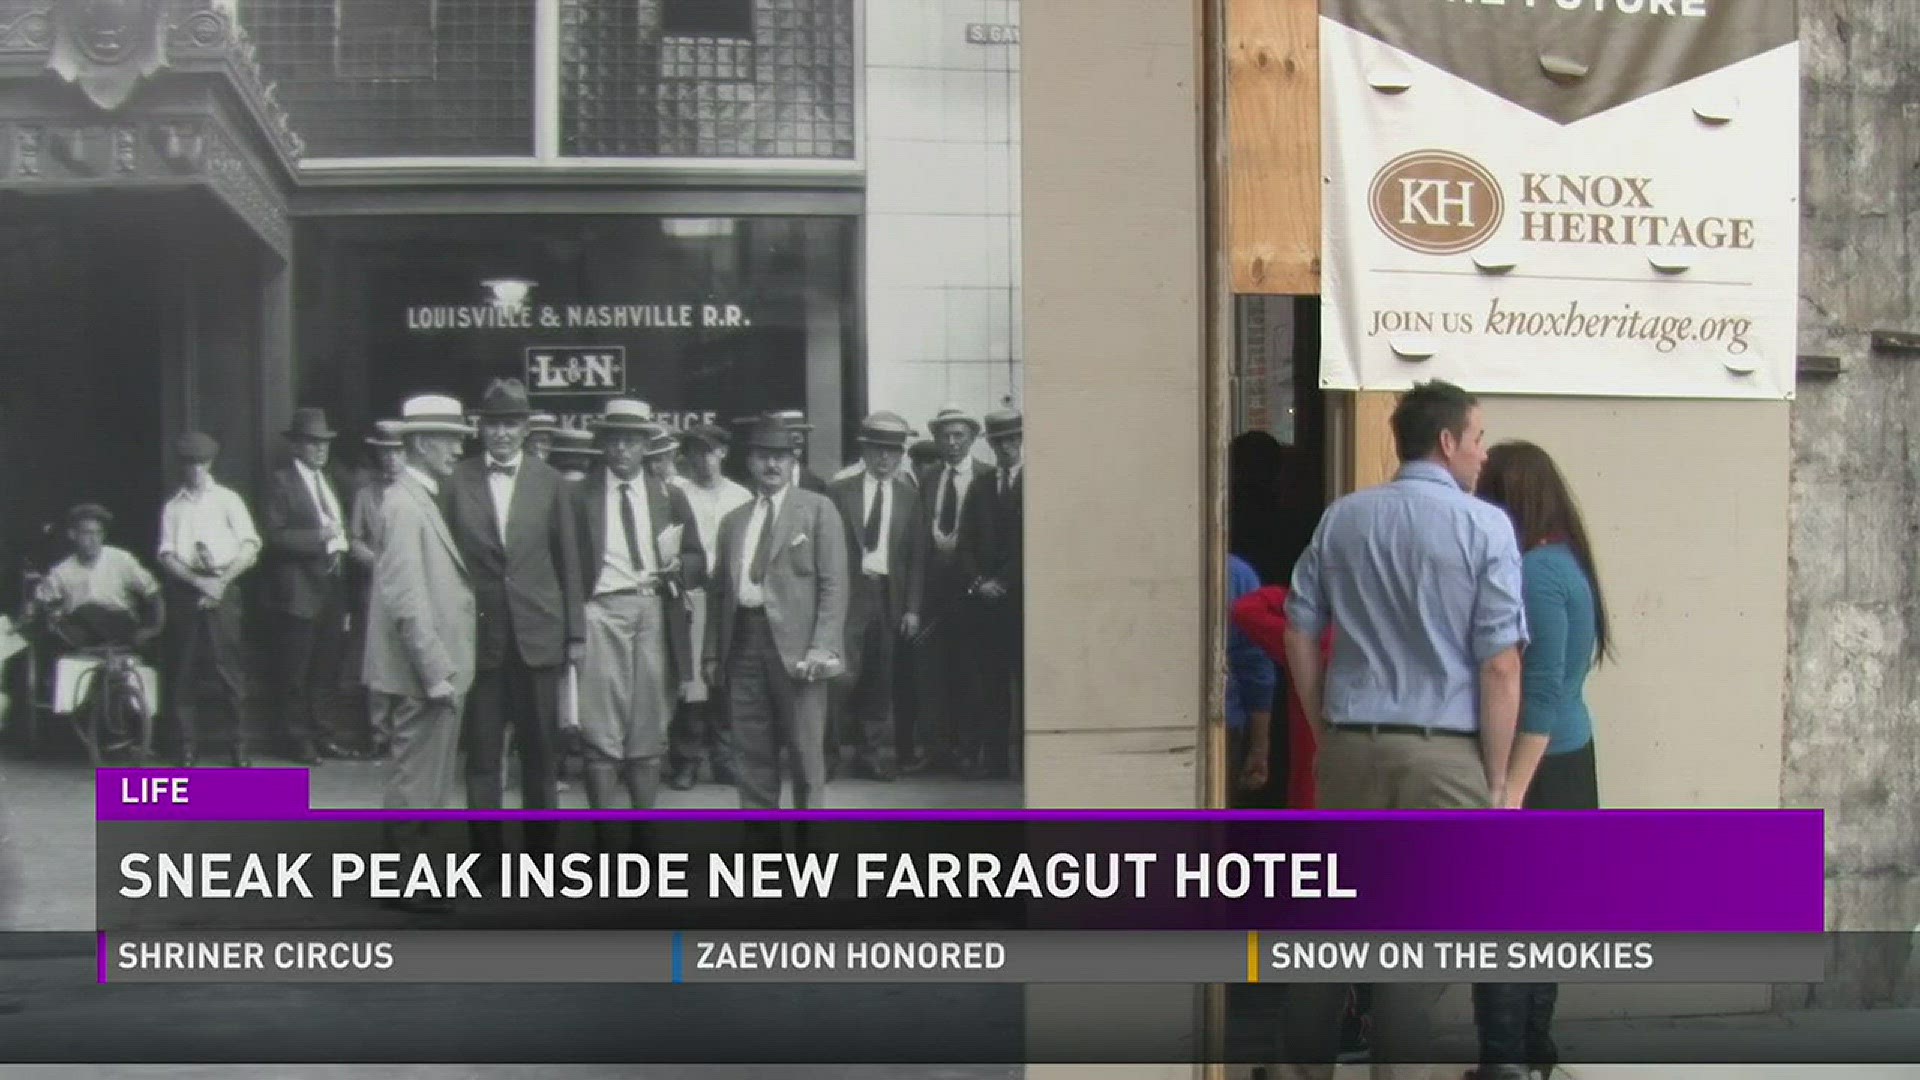 Oct. 21, 2016: The developers behind the new Farragut Hotel gave us a sneak peek behind the historic venue renovations.